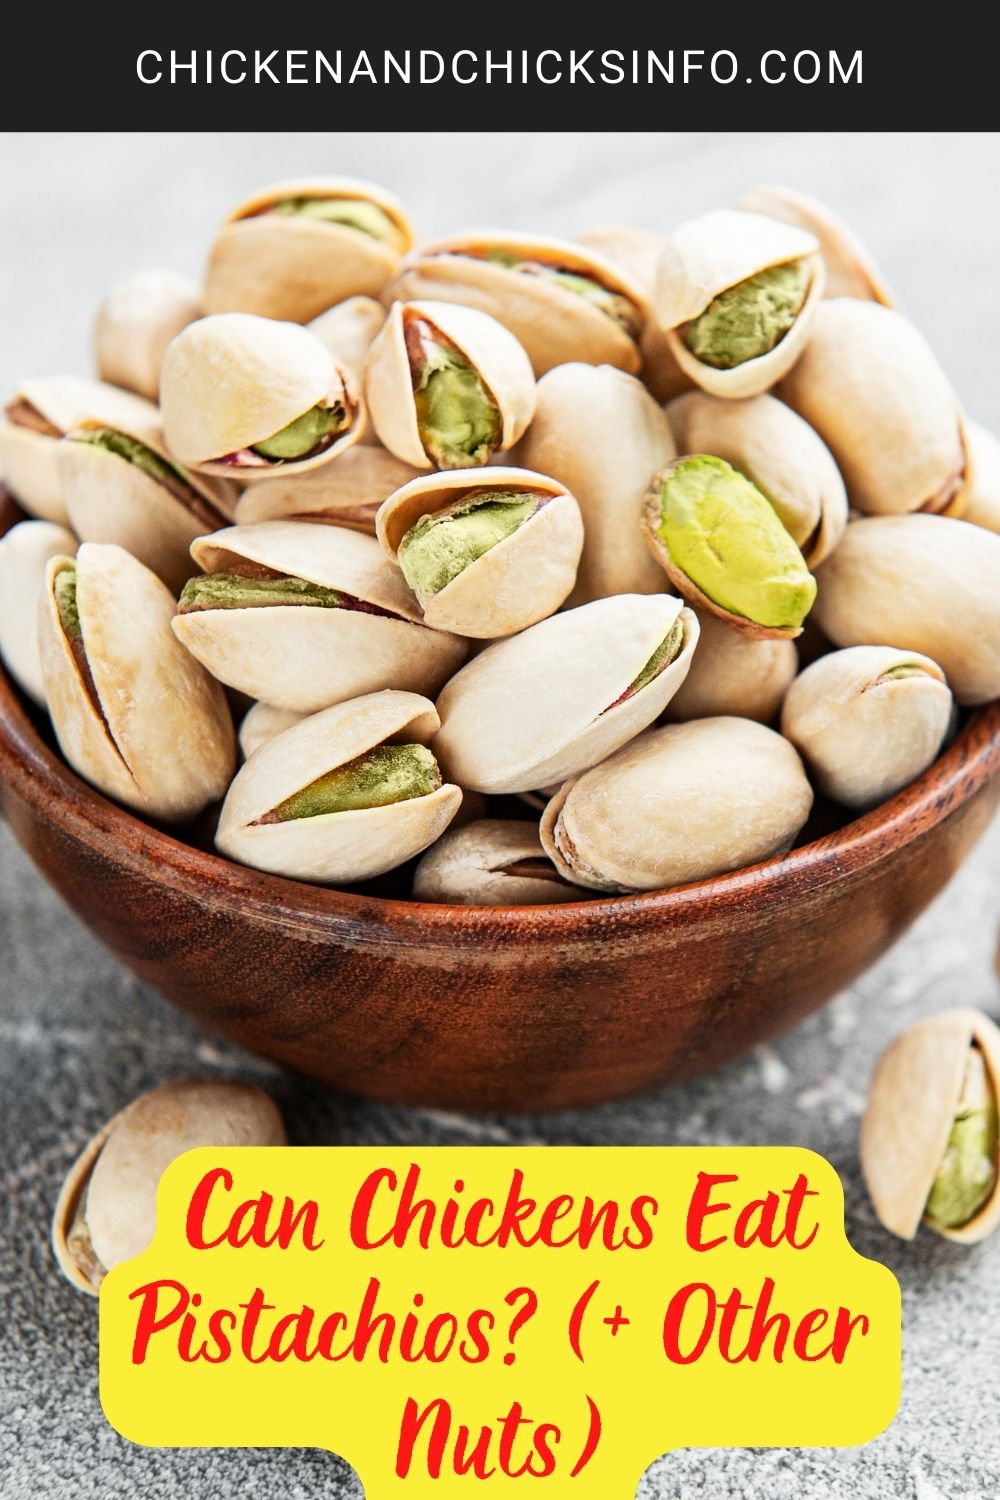 Can Chickens Eat Pistachios? (+ Other Nuts) poster.
